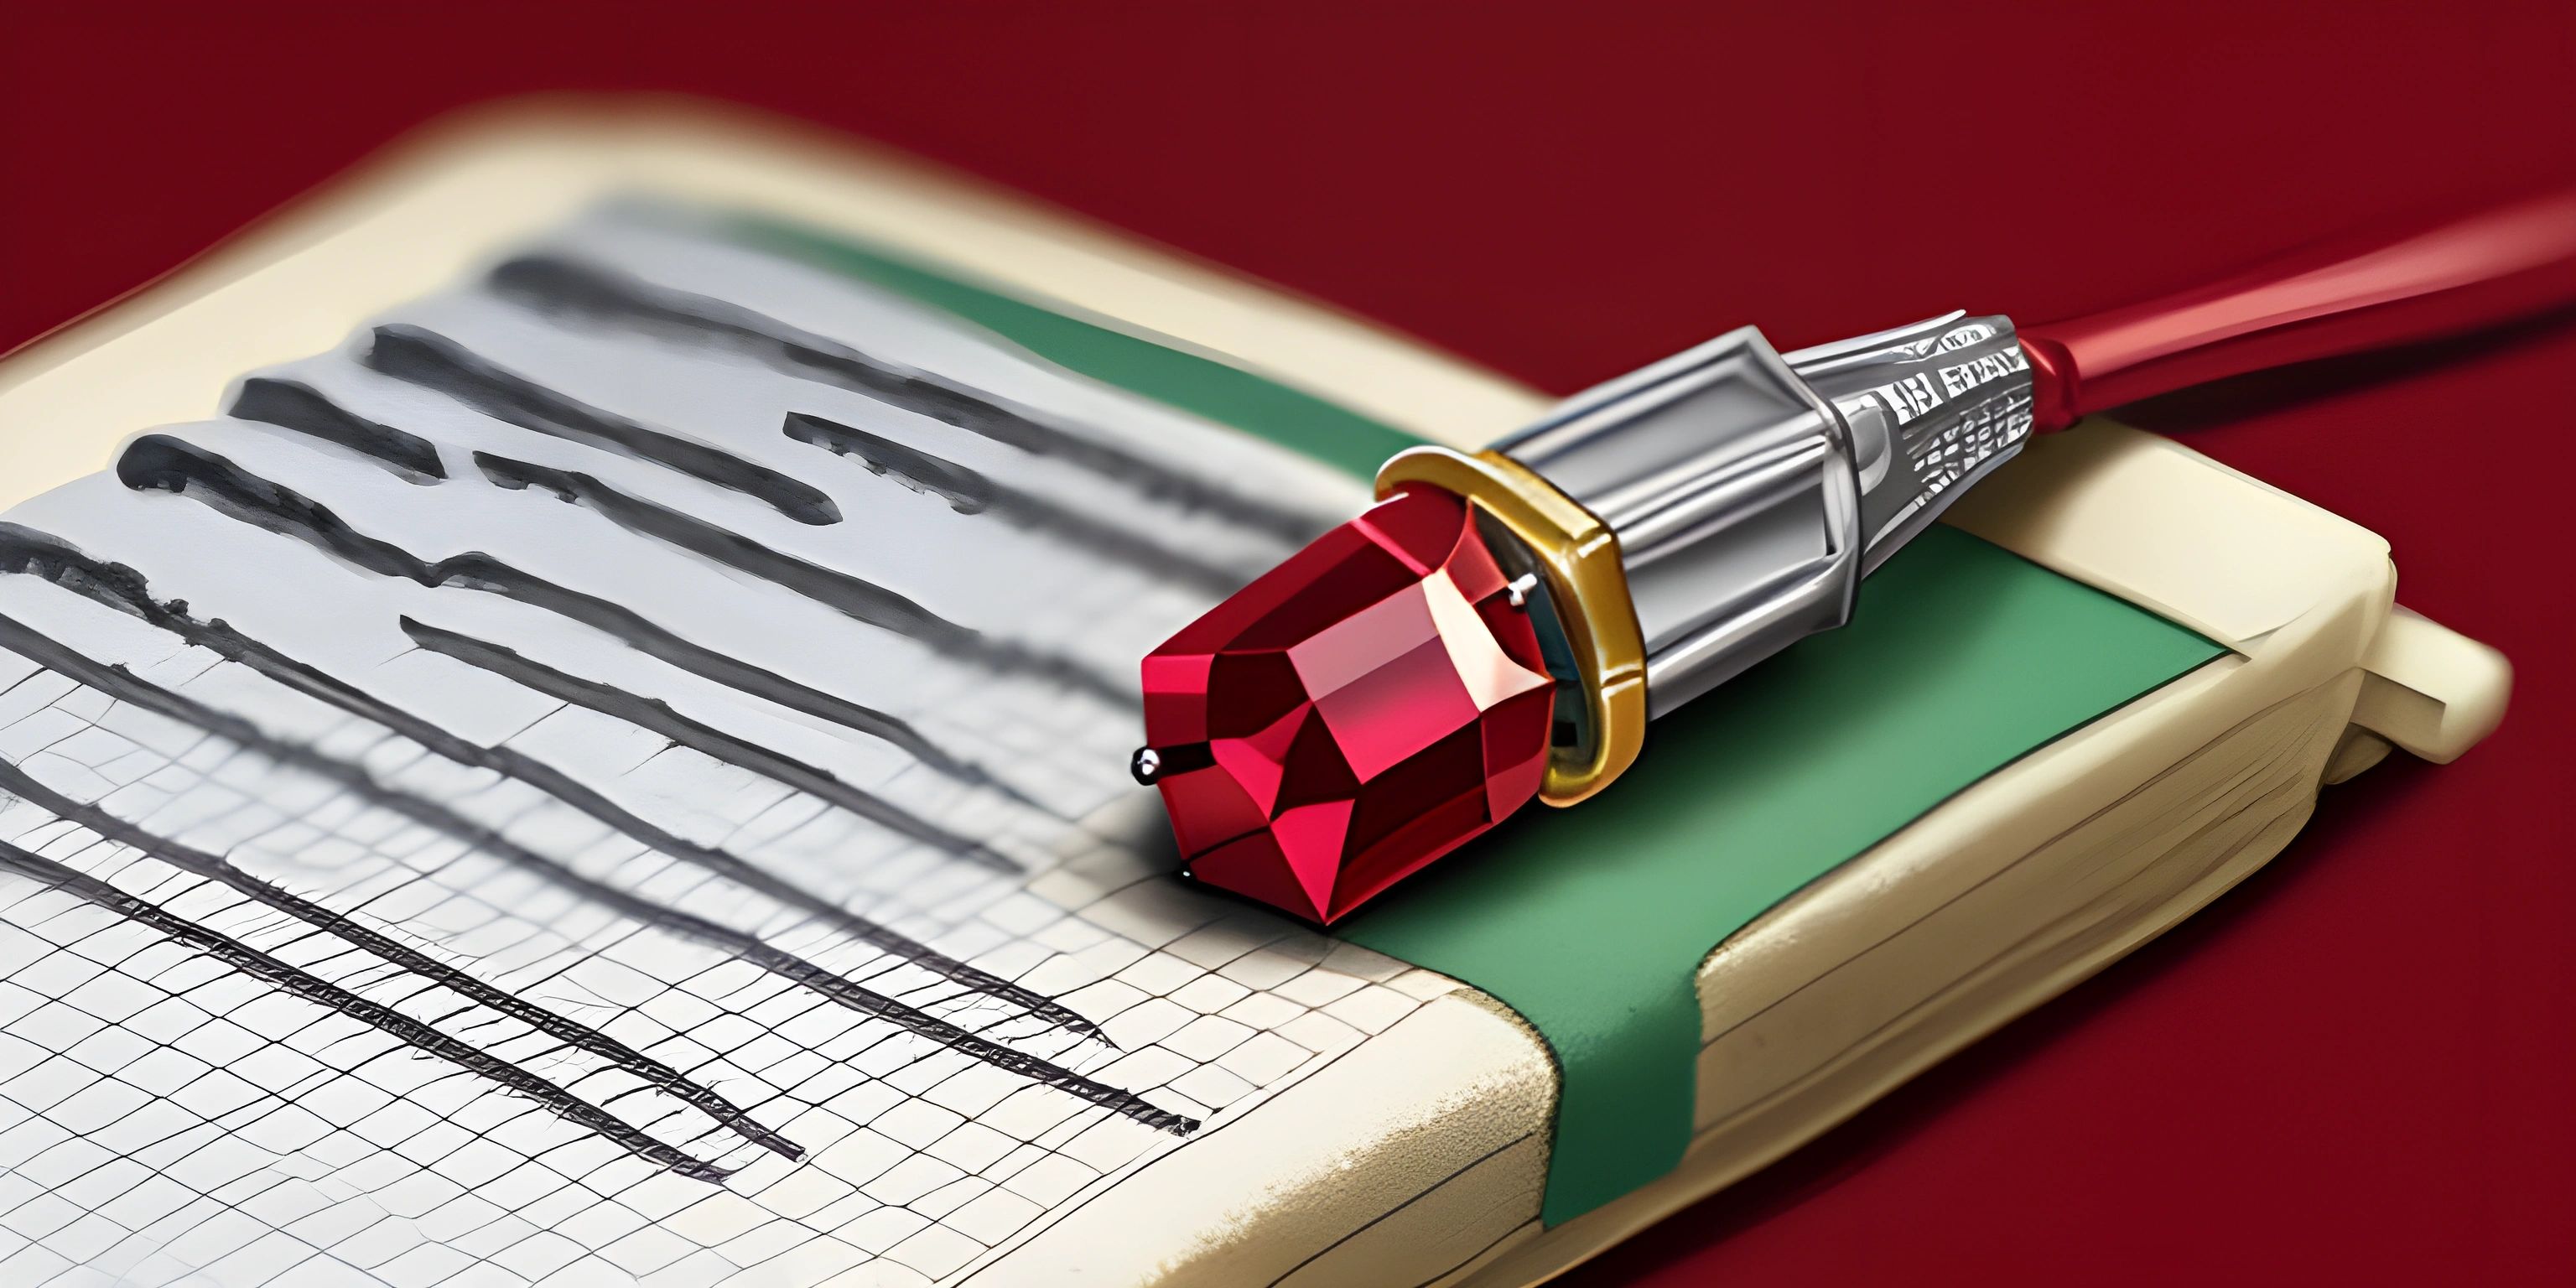 a pen and a red diamond laying on top of a book with other writing on it